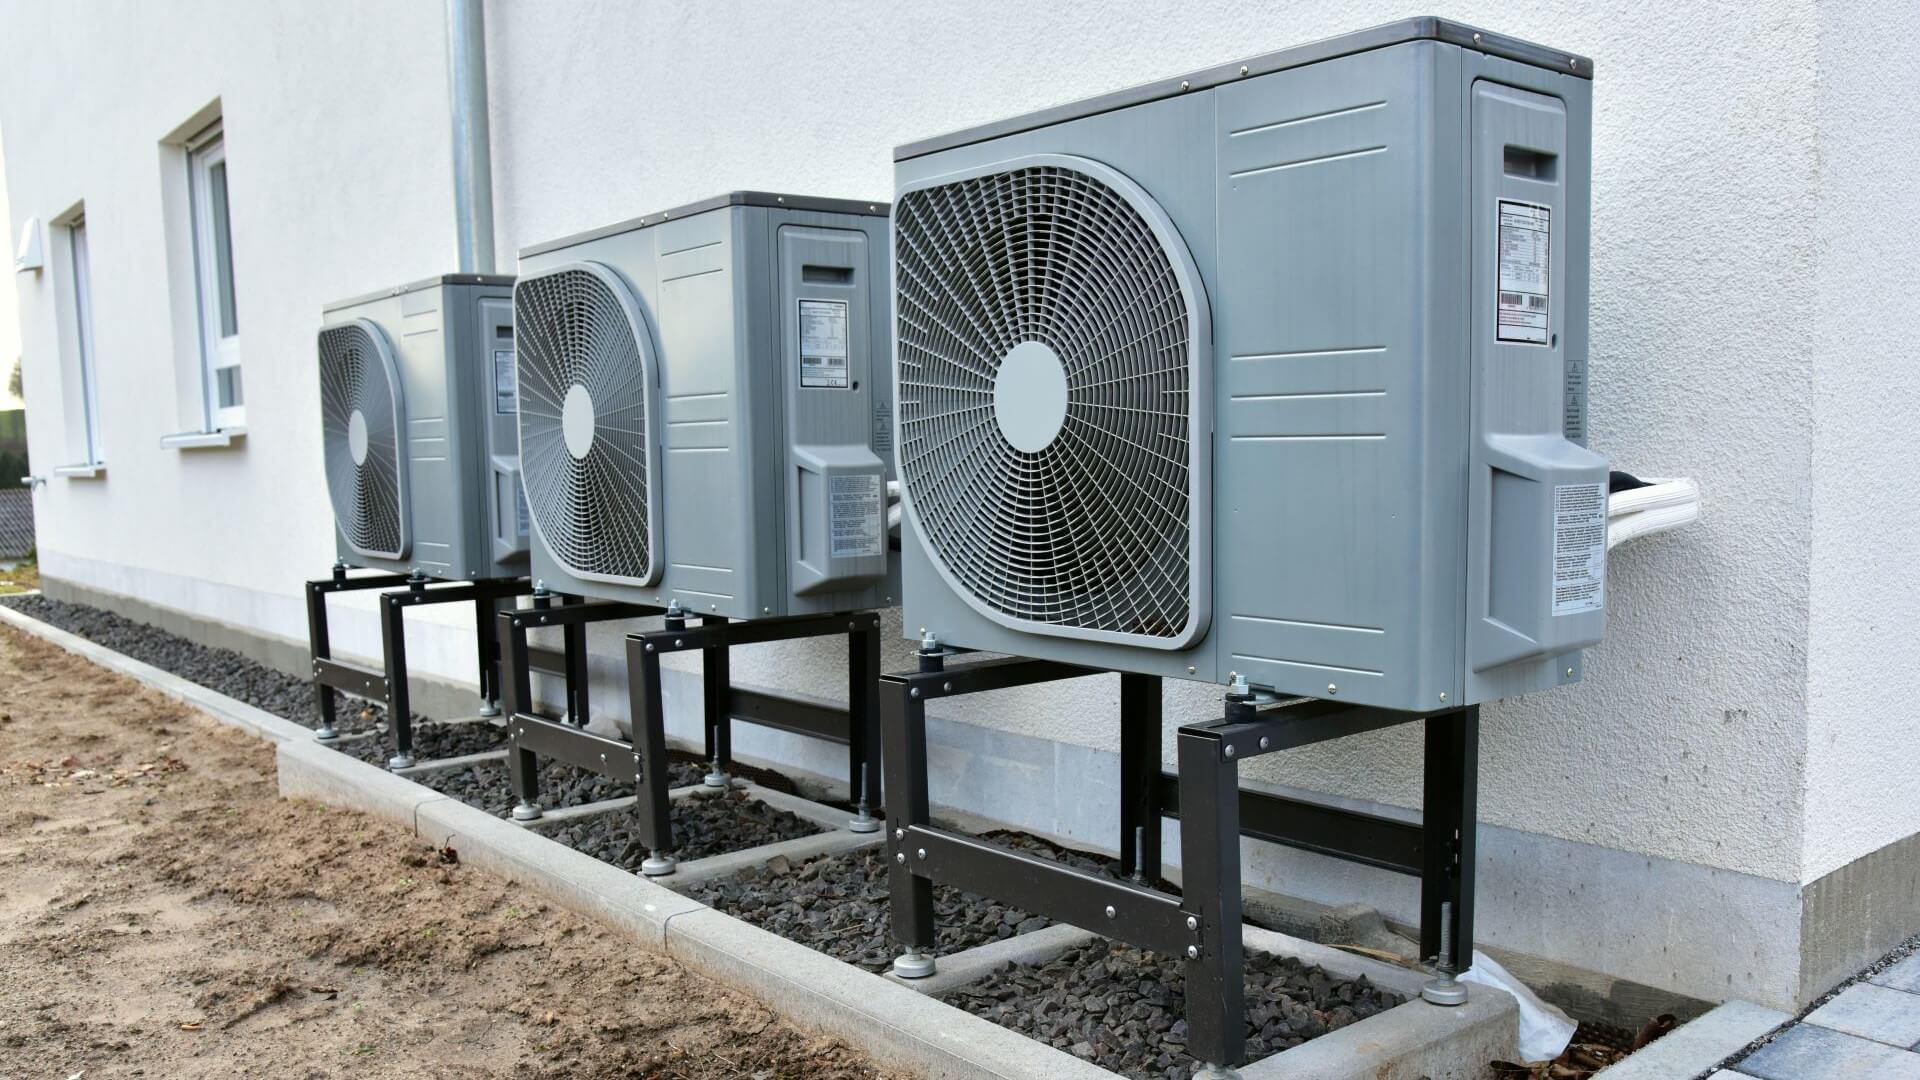 Row of heat pumps outside wall of building